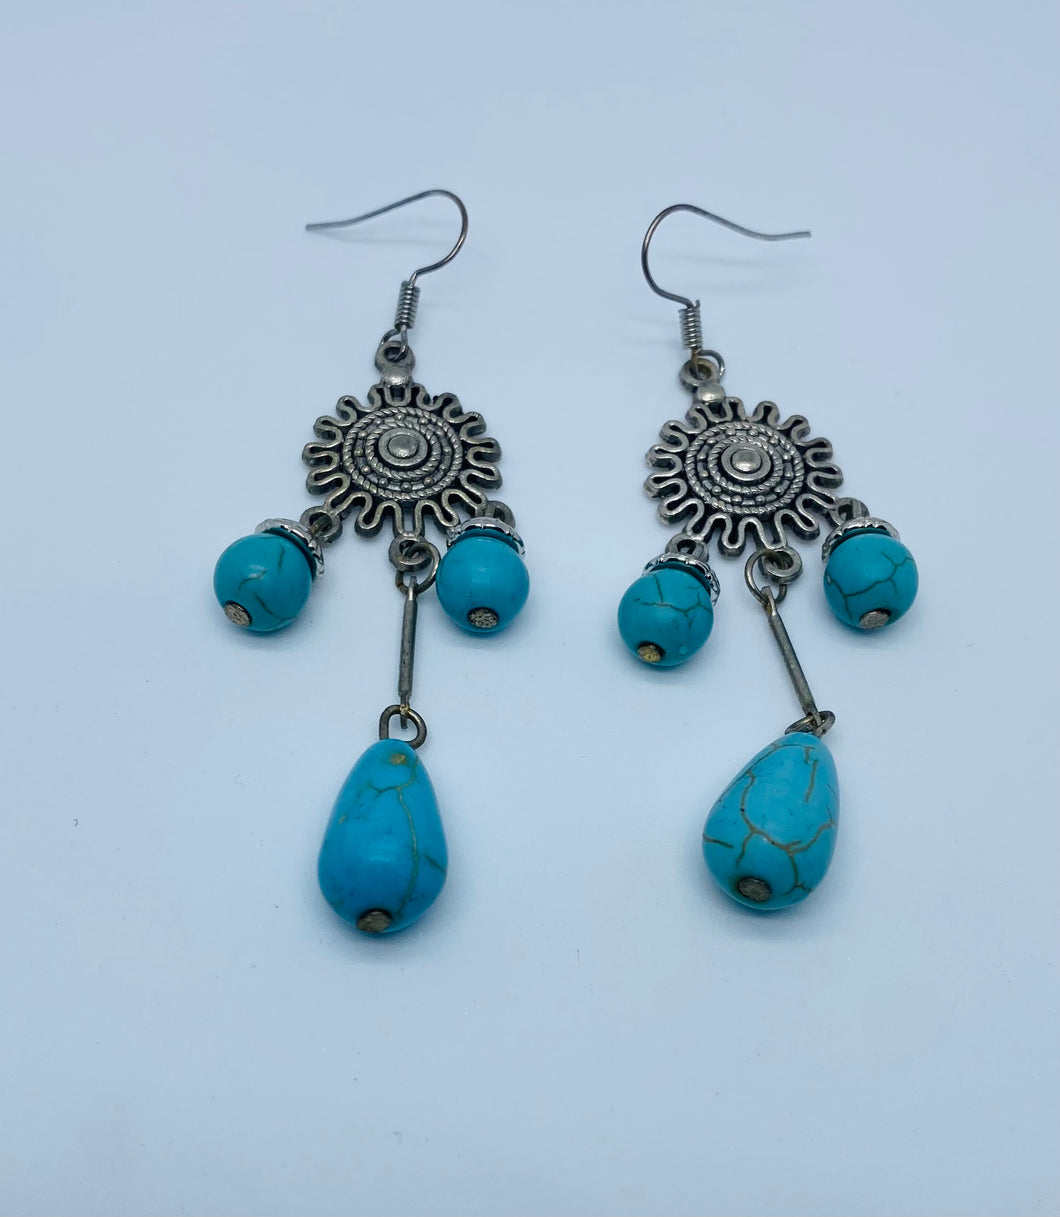 Sundial Chandelier Earrings With Turquoise Drops